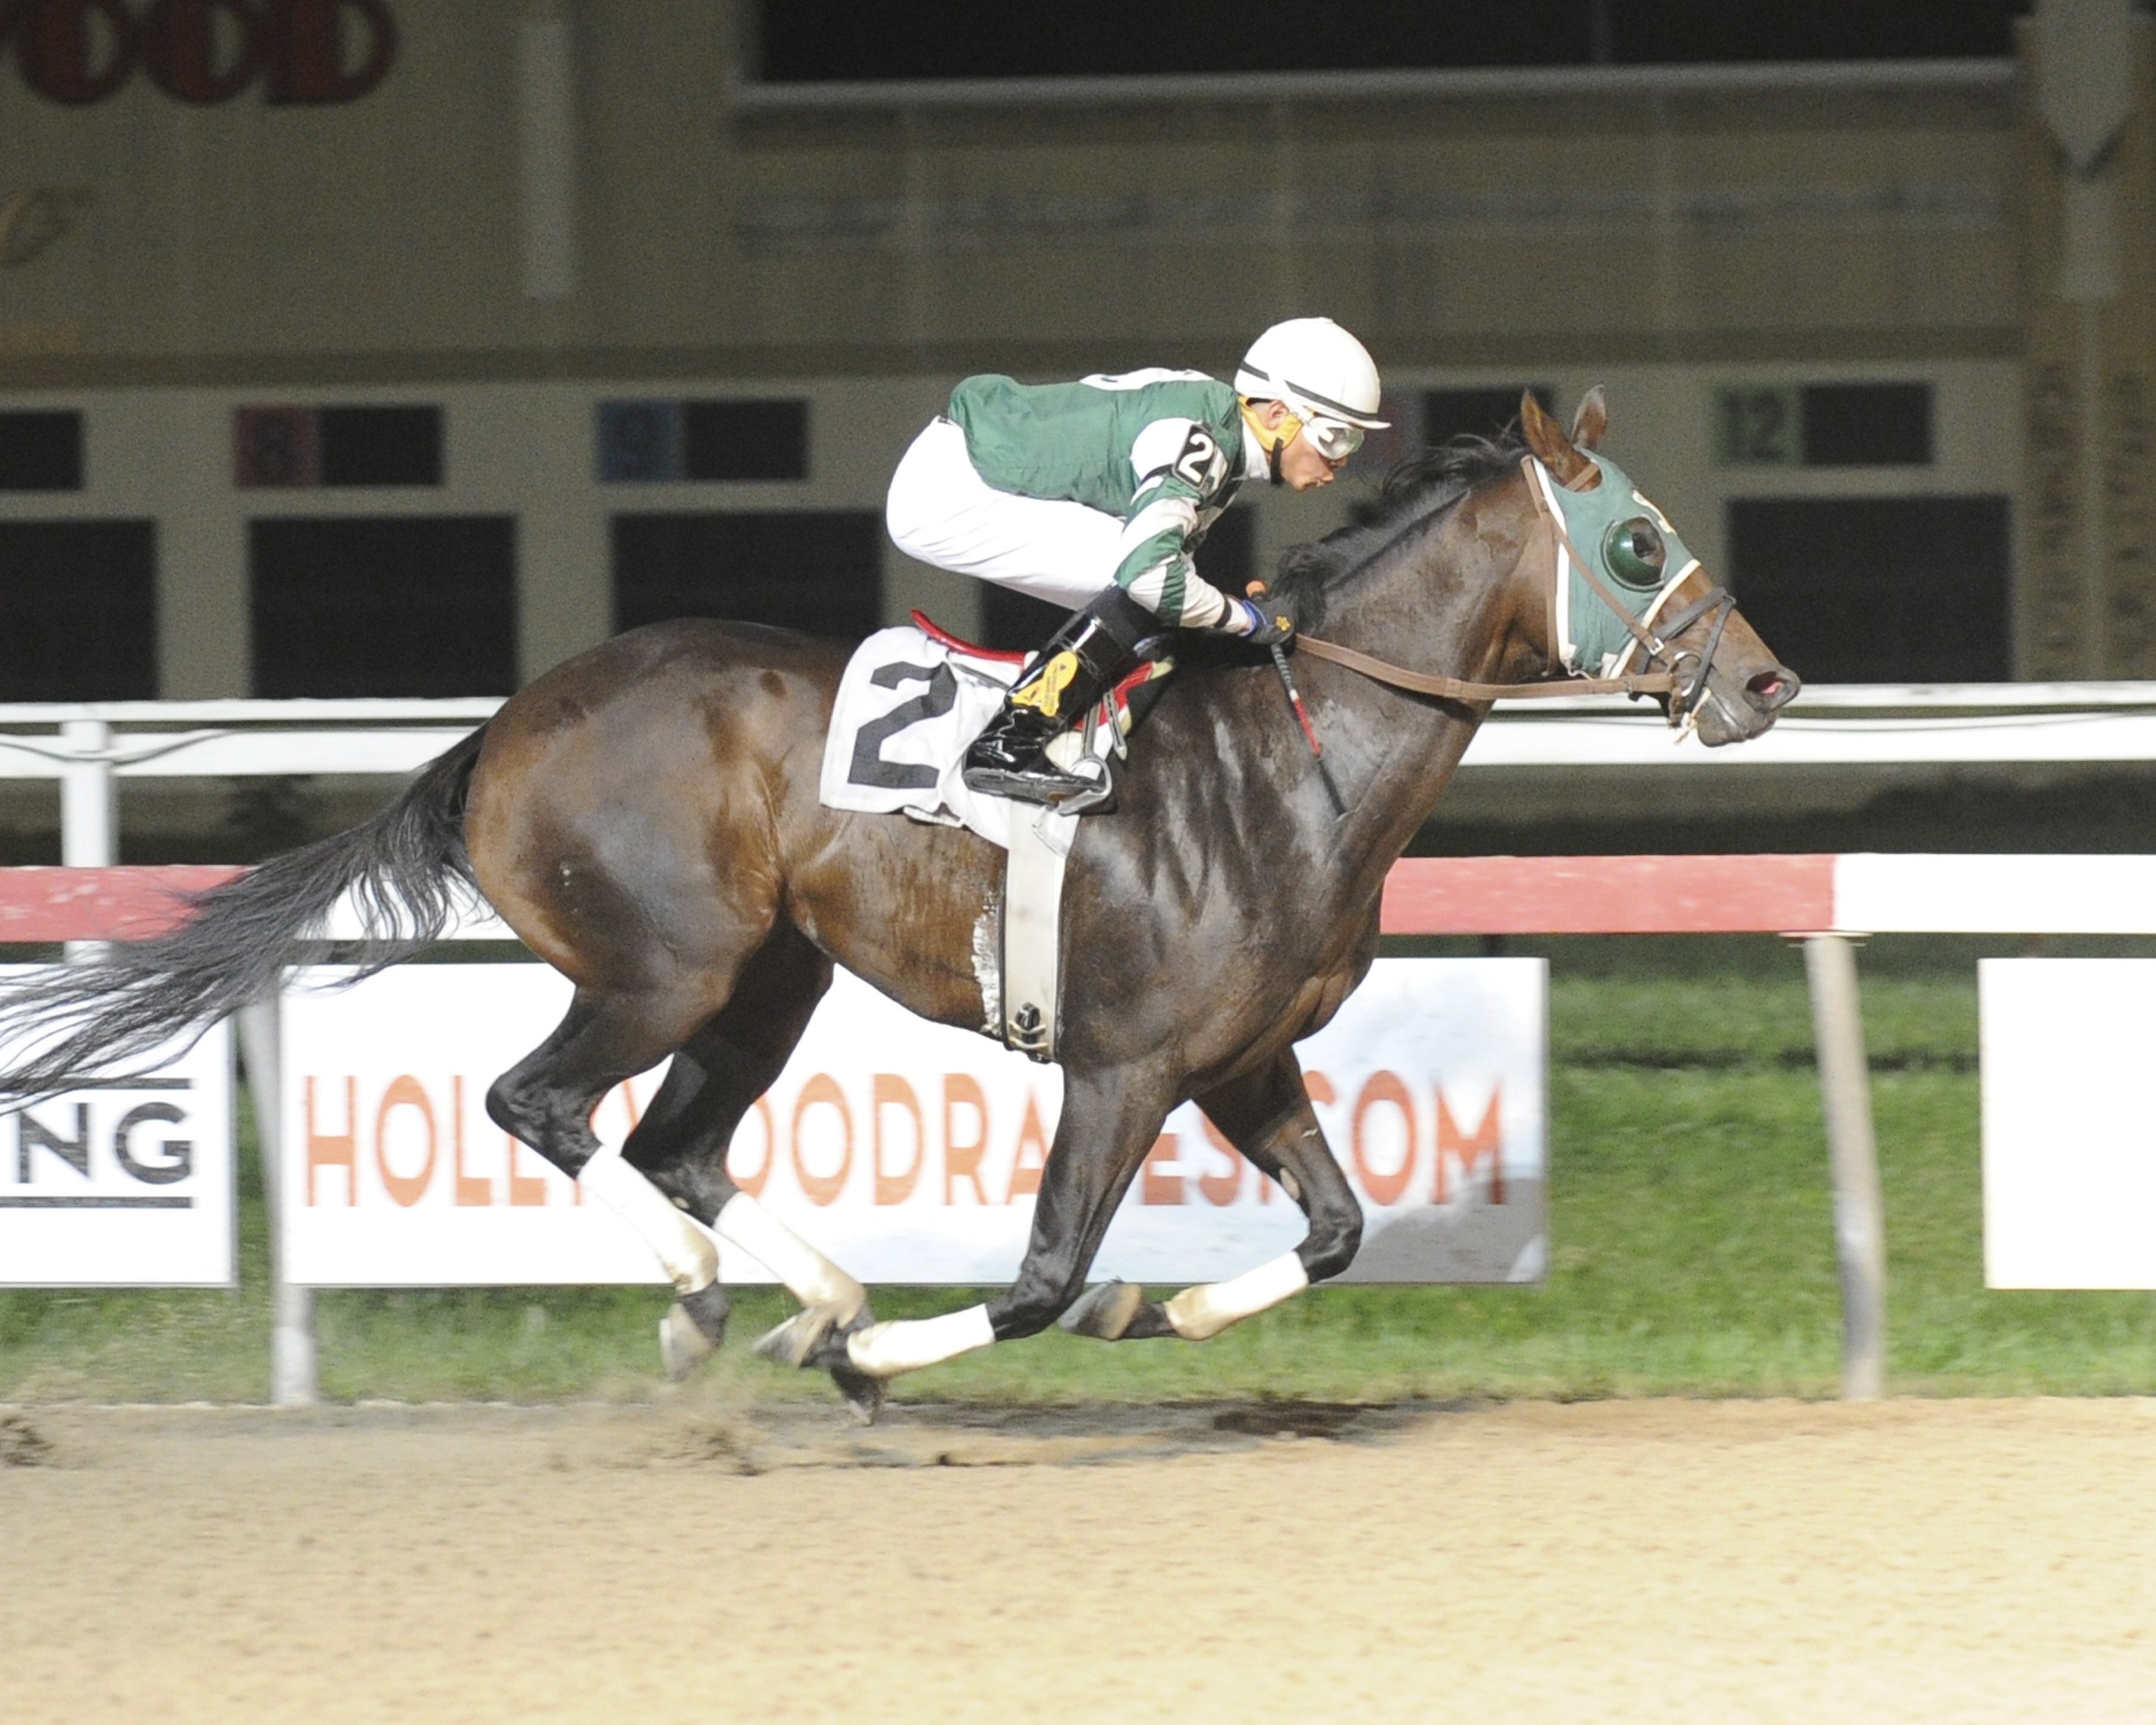 Bird Call, bred by the Lazy lane Farms, dominated October 7th at Penn, winning by 10 lengths. photo by B&D Photography.